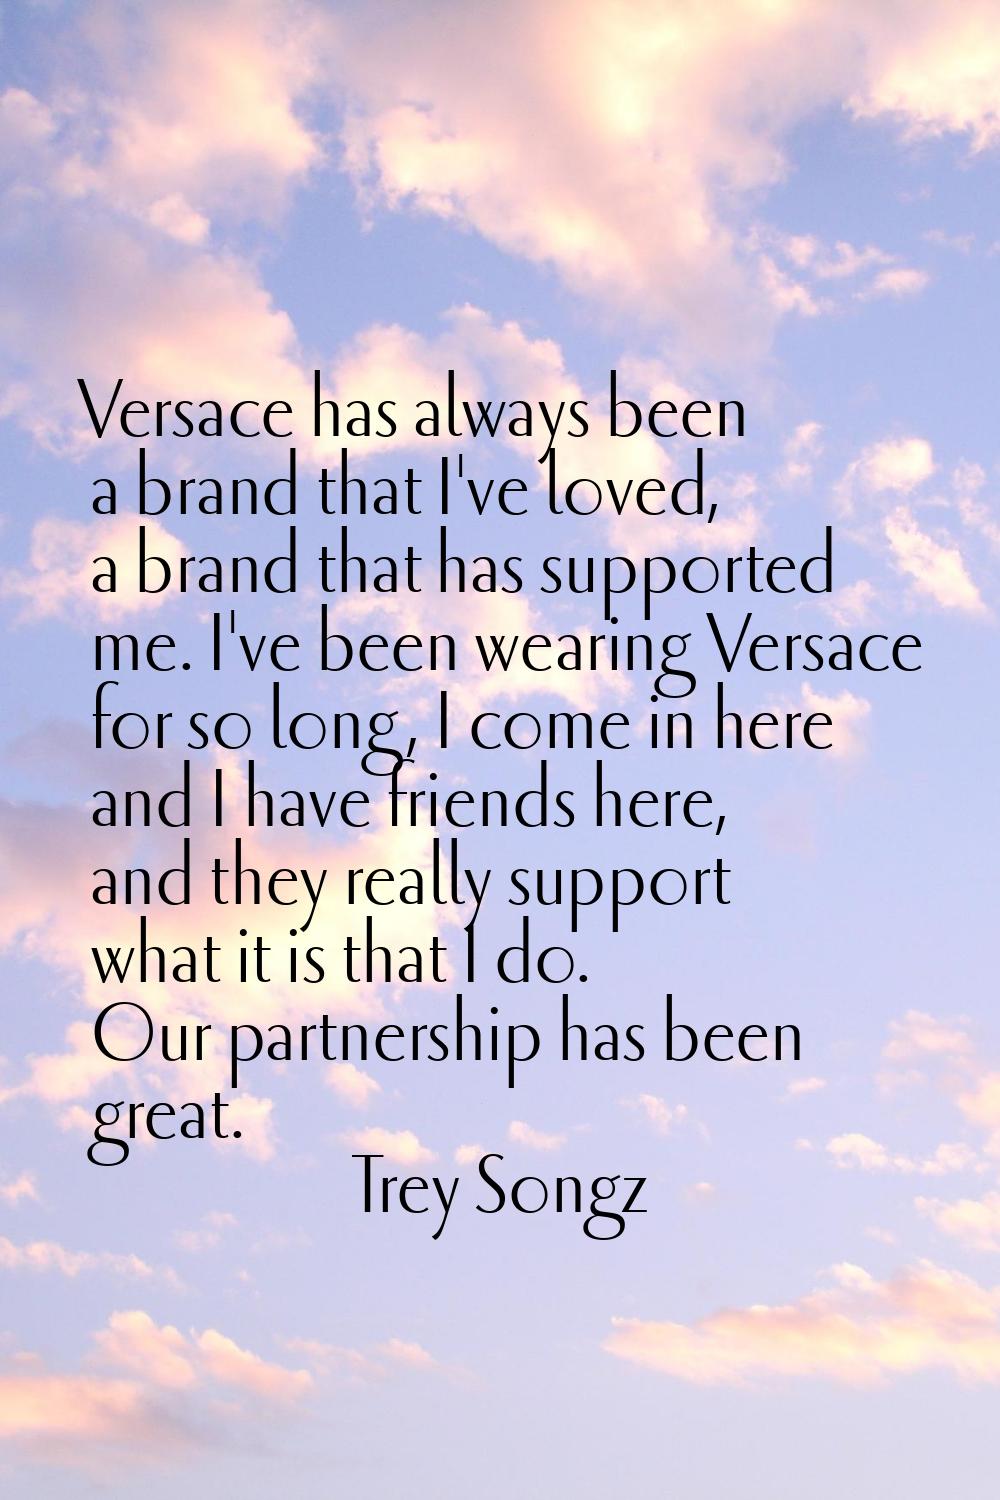 Versace has always been a brand that I've loved, a brand that has supported me. I've been wearing V